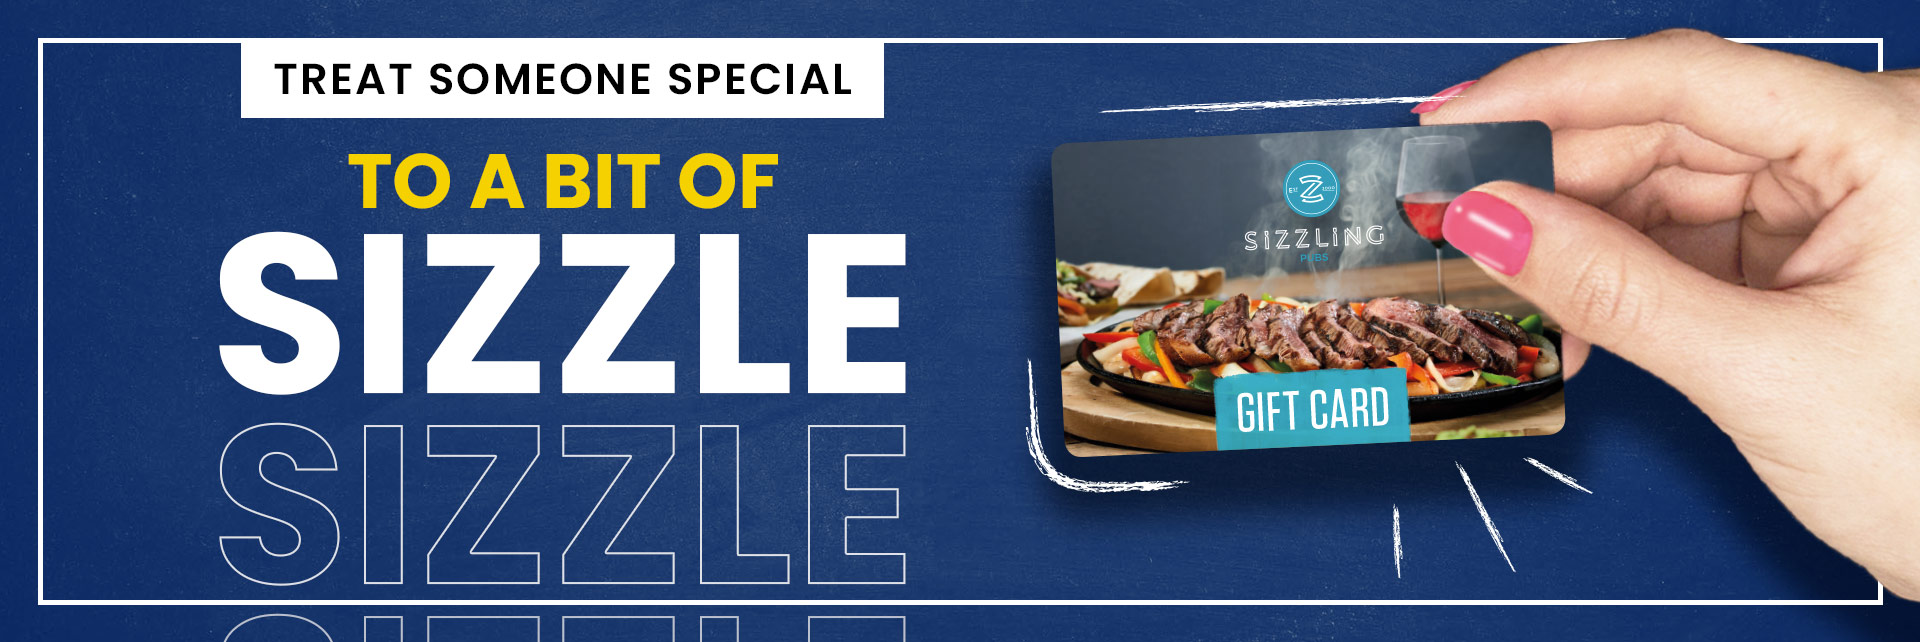 Sizzling Pubs Gift Card at  The Deer’s leap, Swansea in Swansea